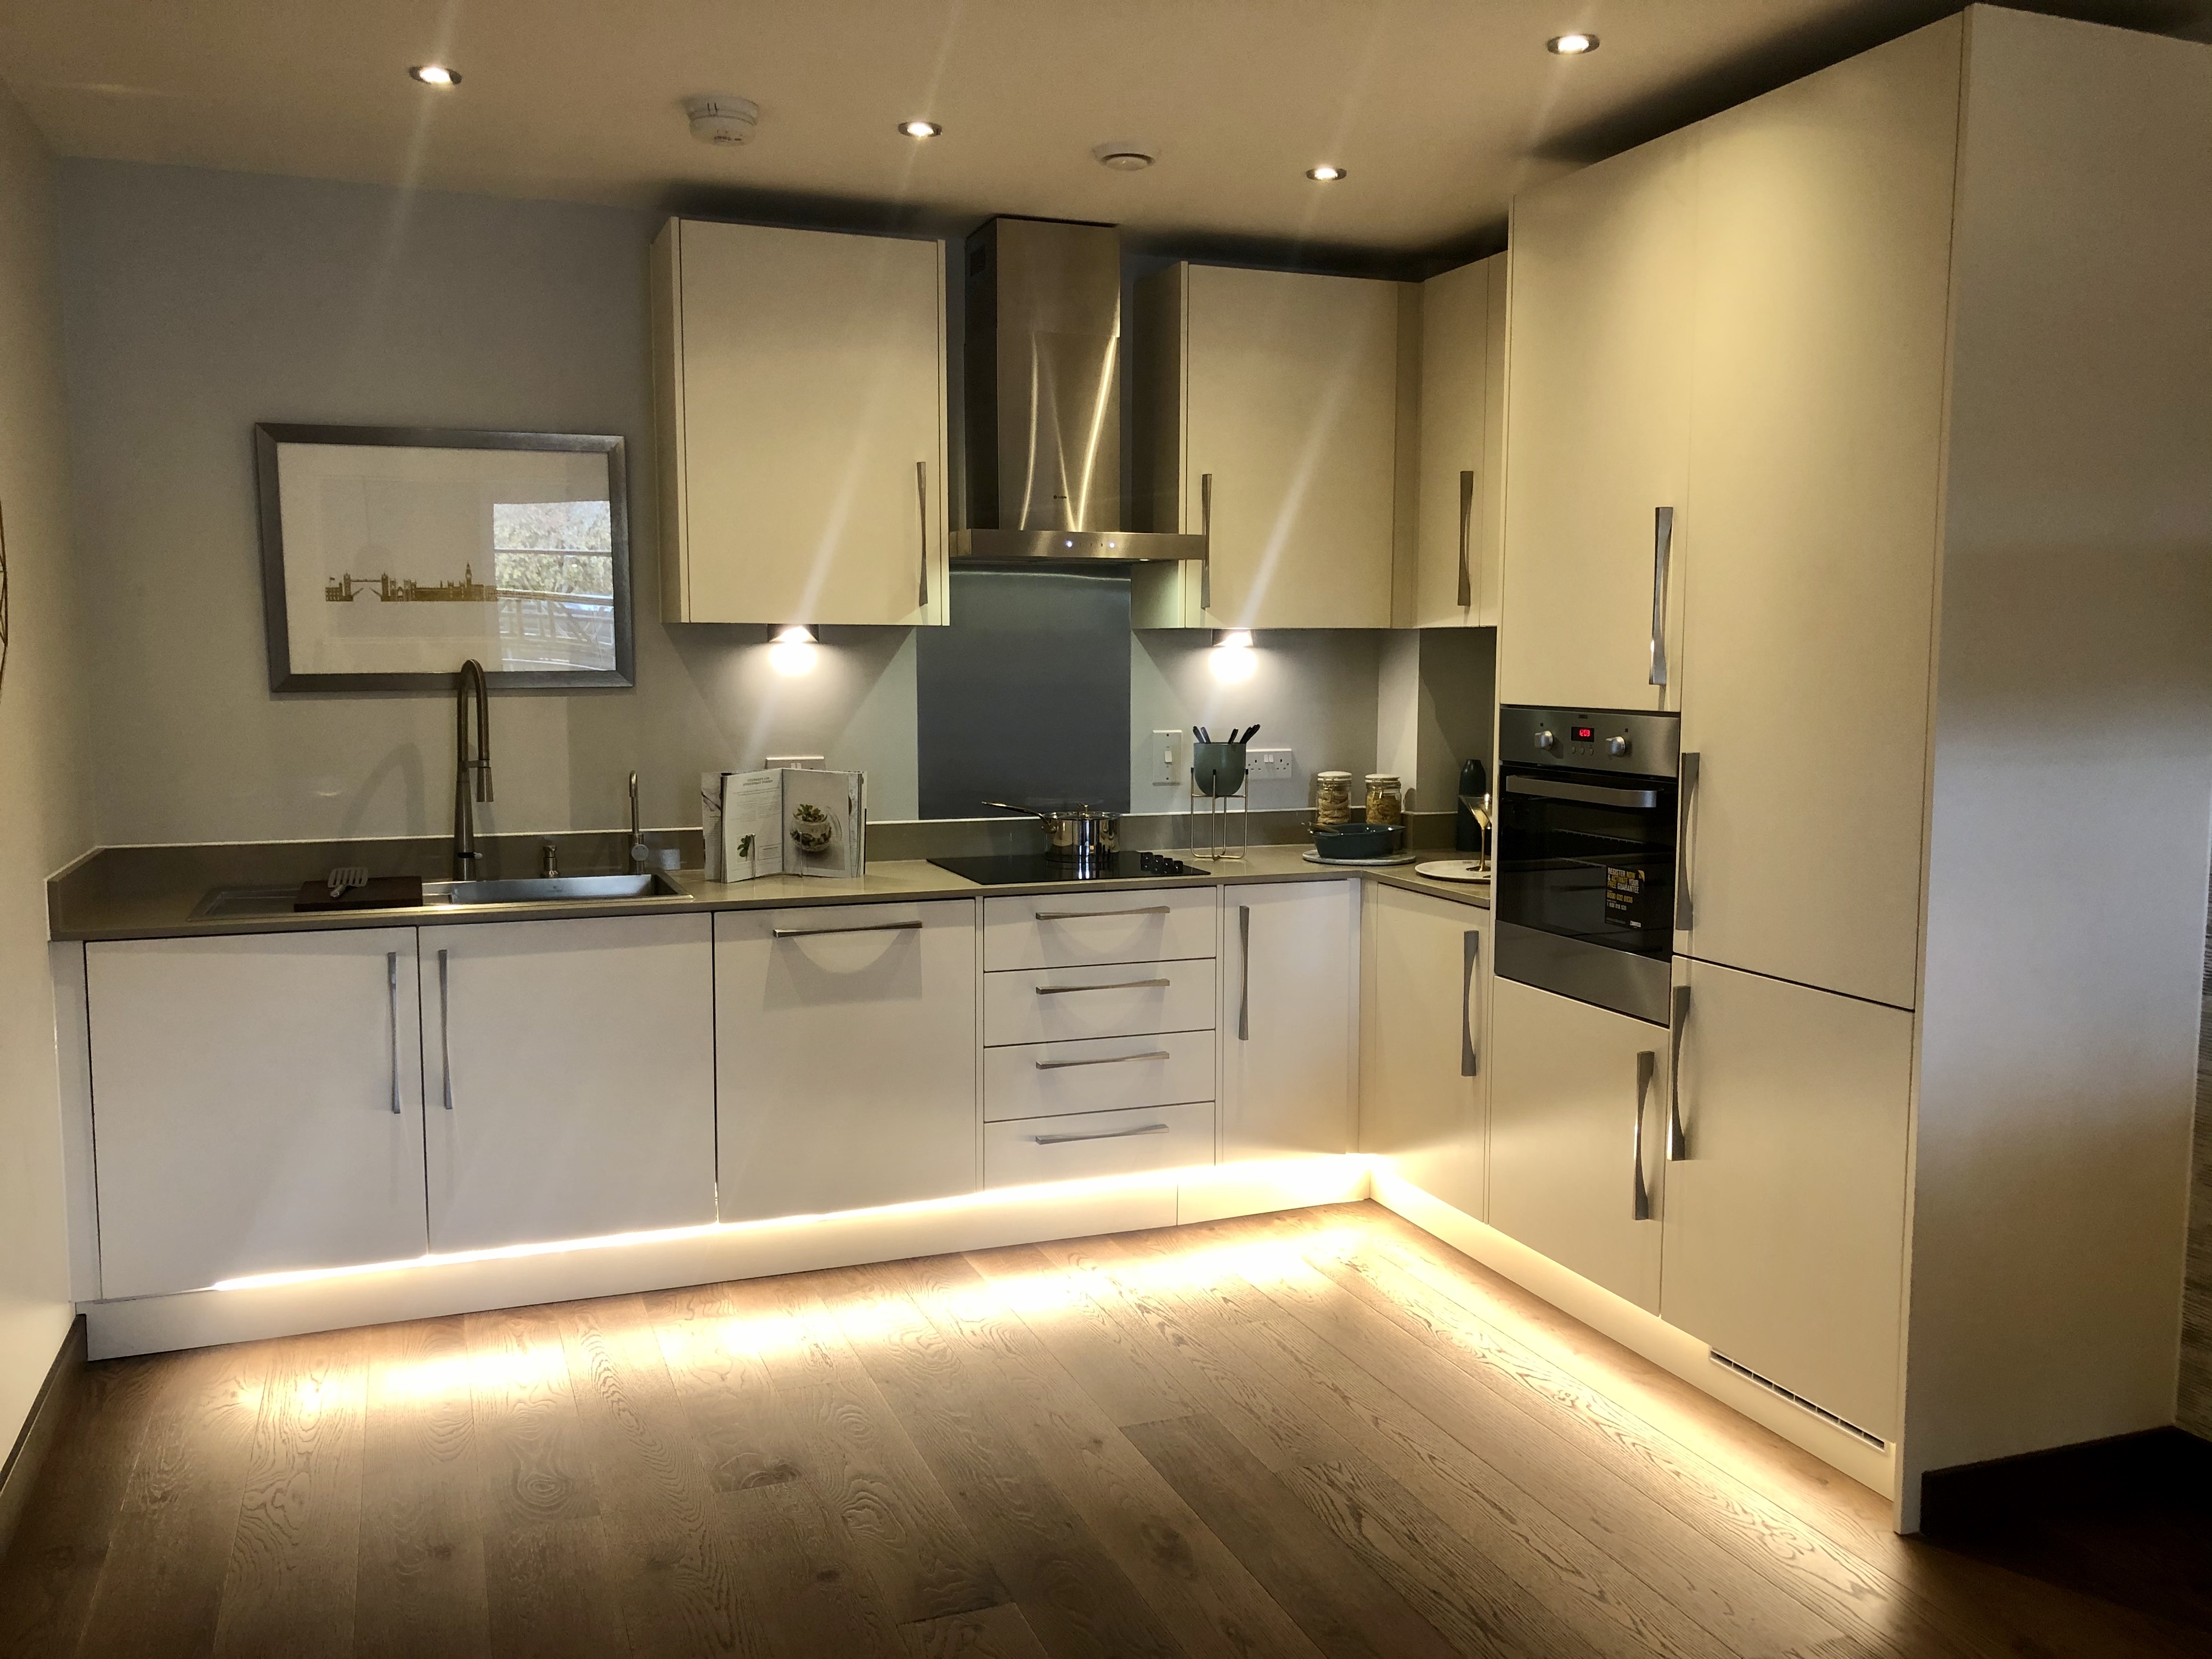 East Grinstead apartments kitchen